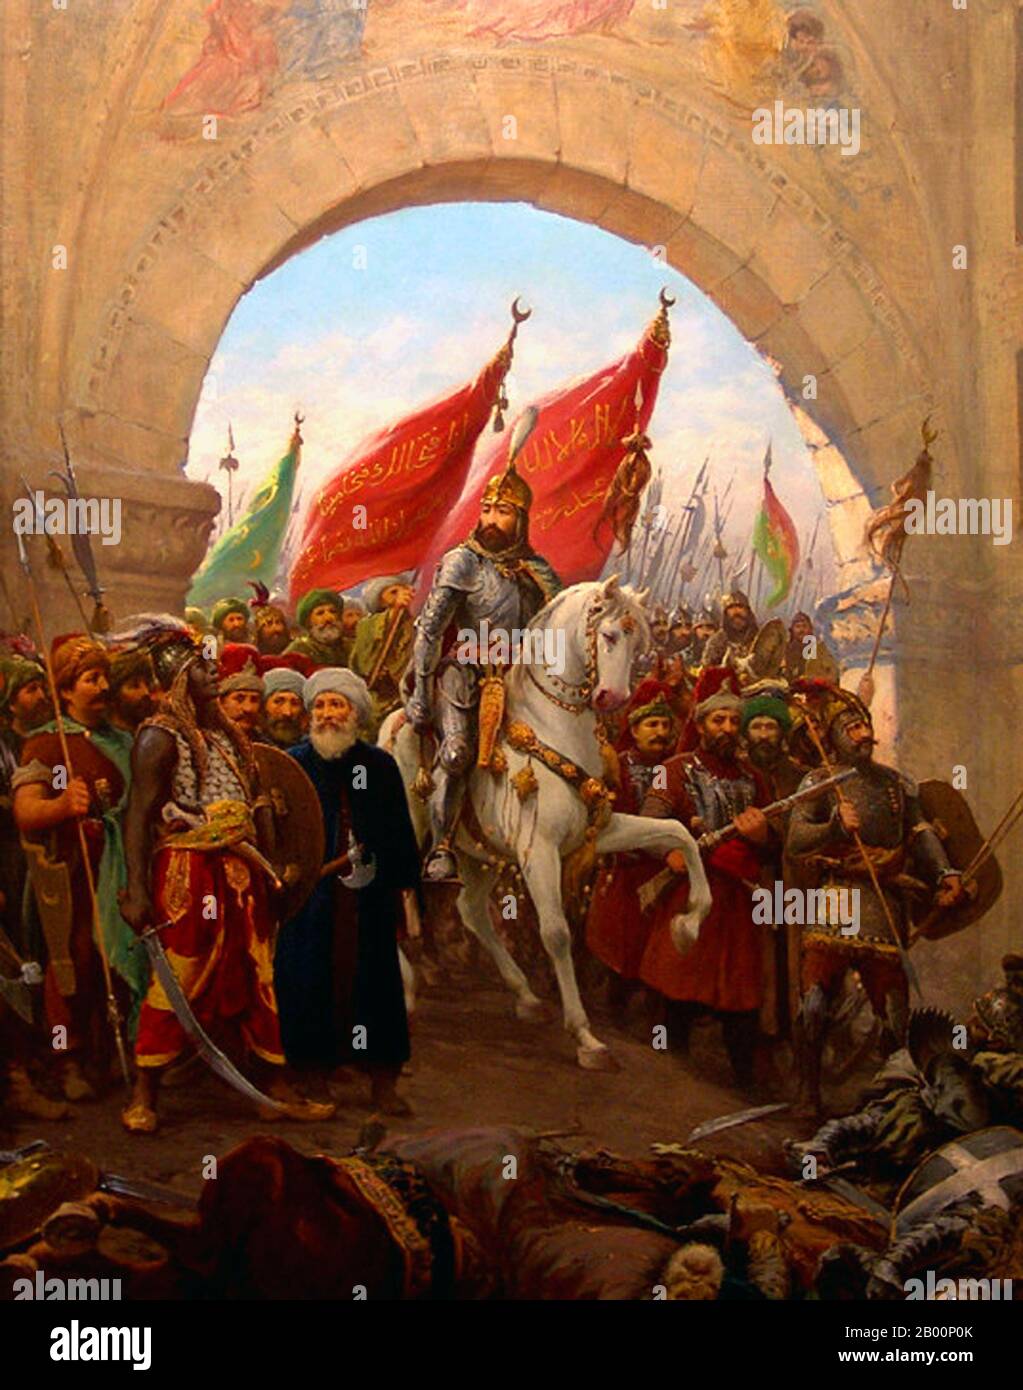 Turkey/Italy: 'The Entry of Mahomet II into Constantinople / The Entry of Fatih Sultan Mehmet into Istanbul'. Oil on canvas painting by Fausto Zonaro (1854-1929), late 19th century.  Mehmed II (March 30, 1432 – May 3, 1481) or, in modern Turkish, Fatih Sultan Mehmet; known as Mahomet or Mohammed II in early modern Europe) was Sultan of the Ottoman Empire from 1444 to September 1446, and later from February 1451 to 1481. At the age of 21, he conquered Constantinople, now Istanbul, bringing an end to the Byzantine Empire. Stock Photo